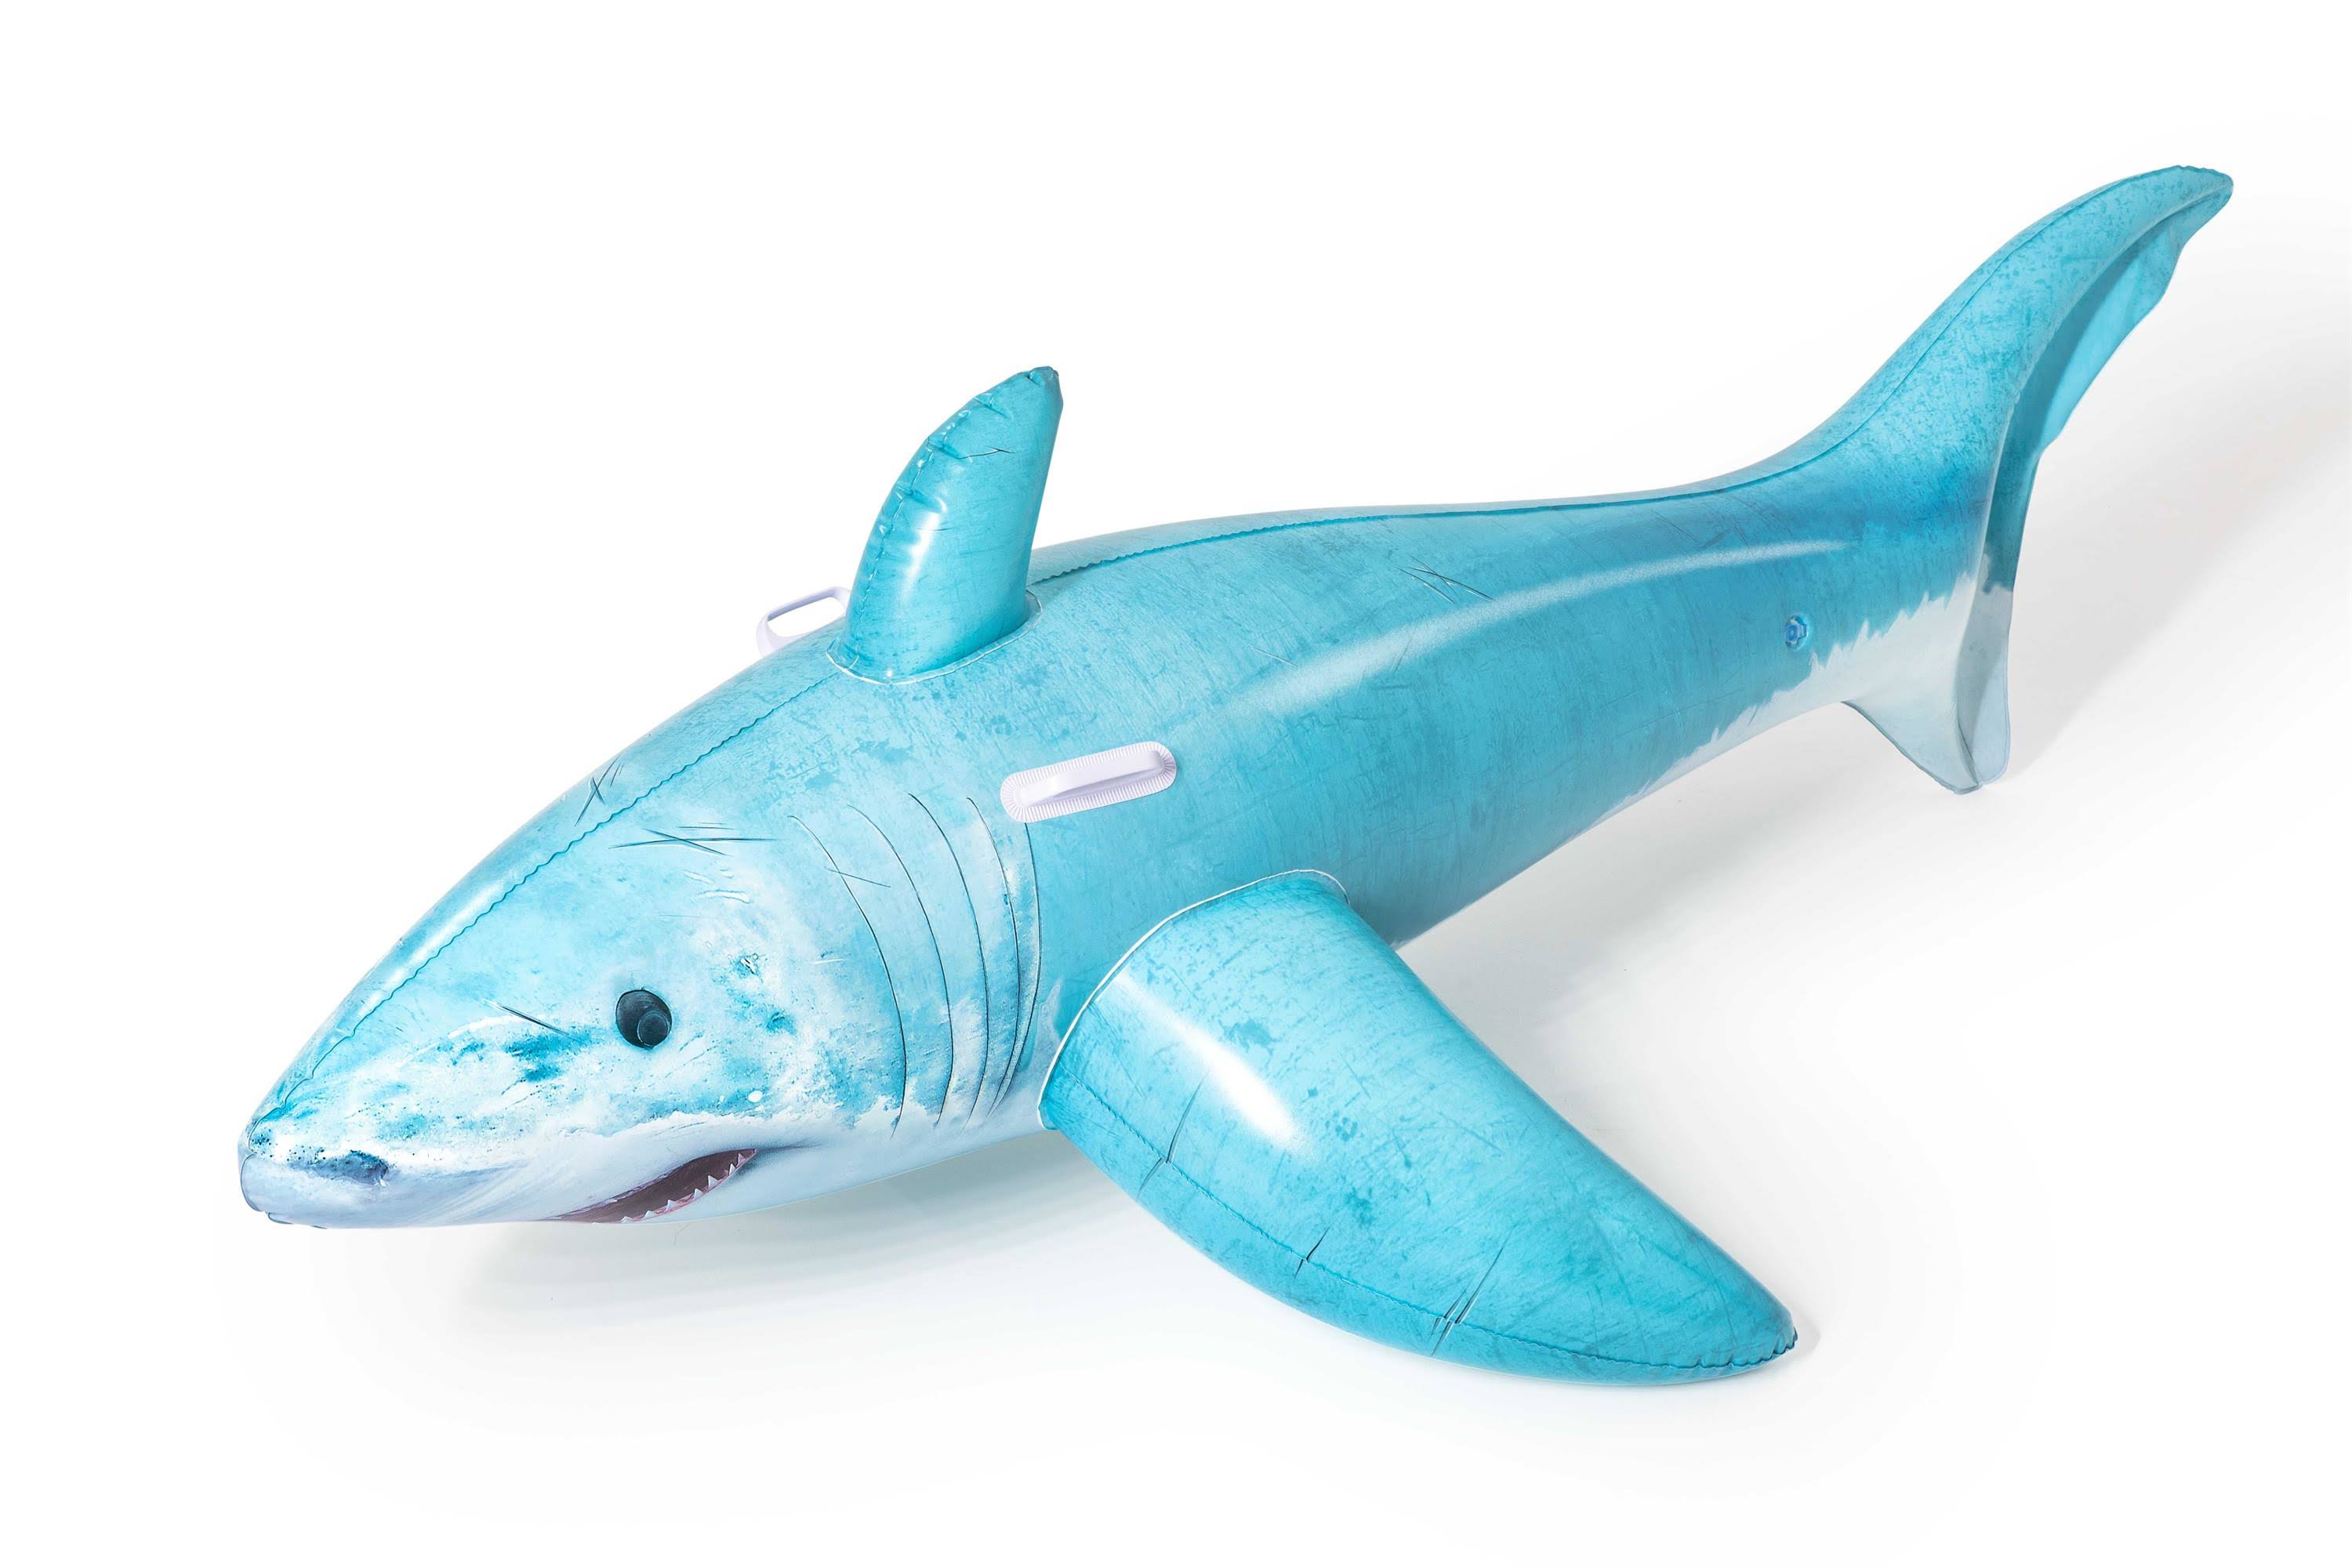 Bestway BW41405 Realistic Shark Pool Float, Inflatable Rubber Ride On